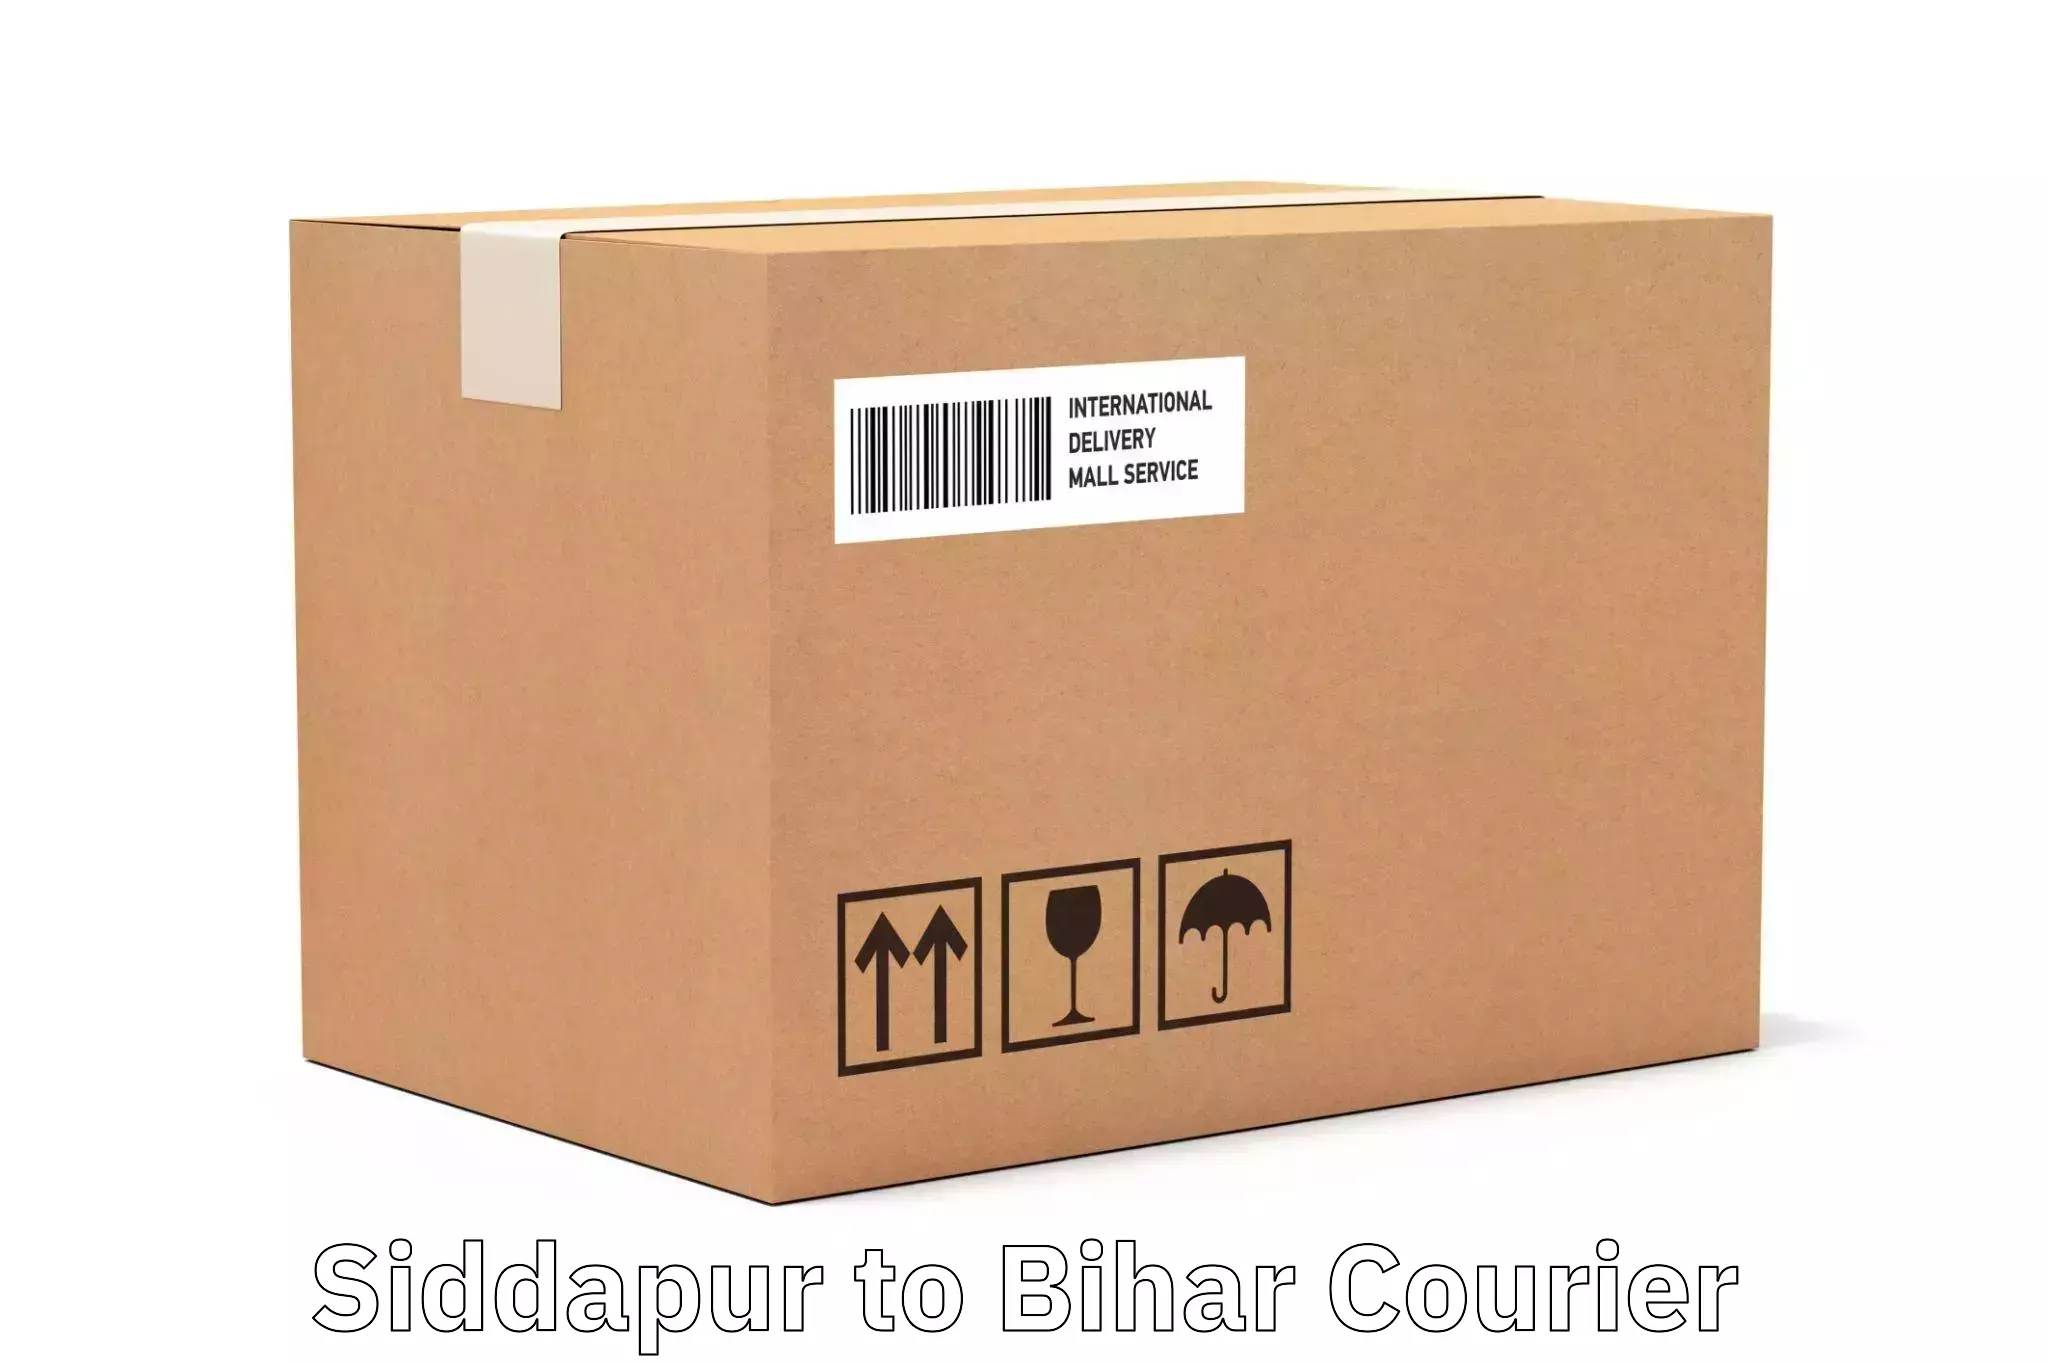 Courier service innovation Siddapur to Fatwah